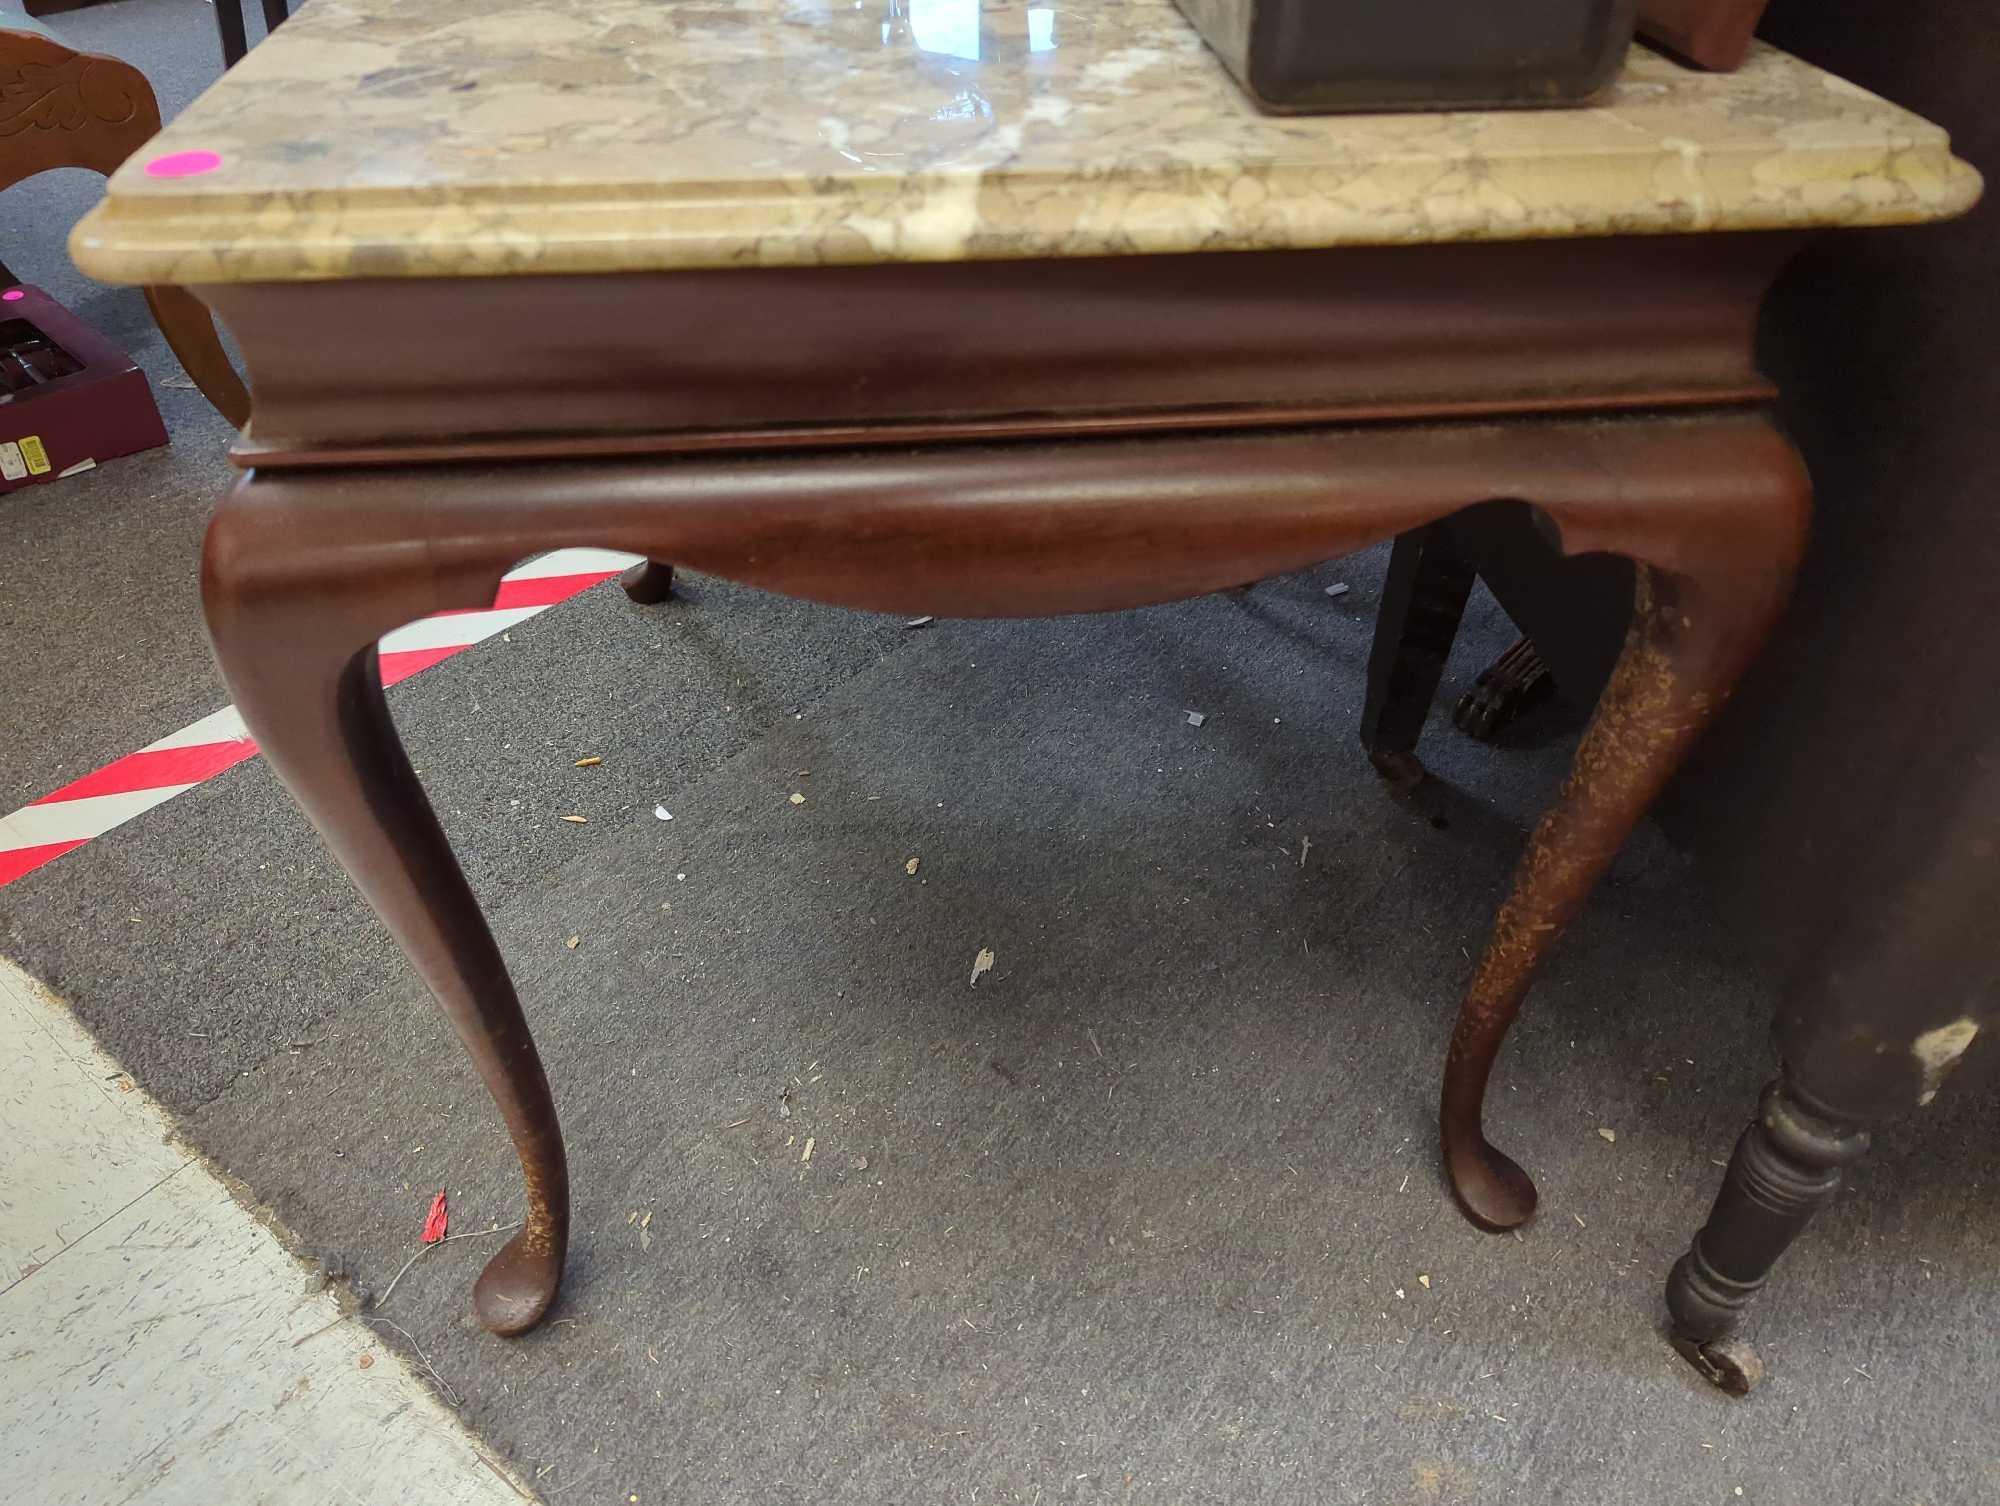 Marble top end table with extendable table top space drawer. Comes as a shown in photos. Appears to